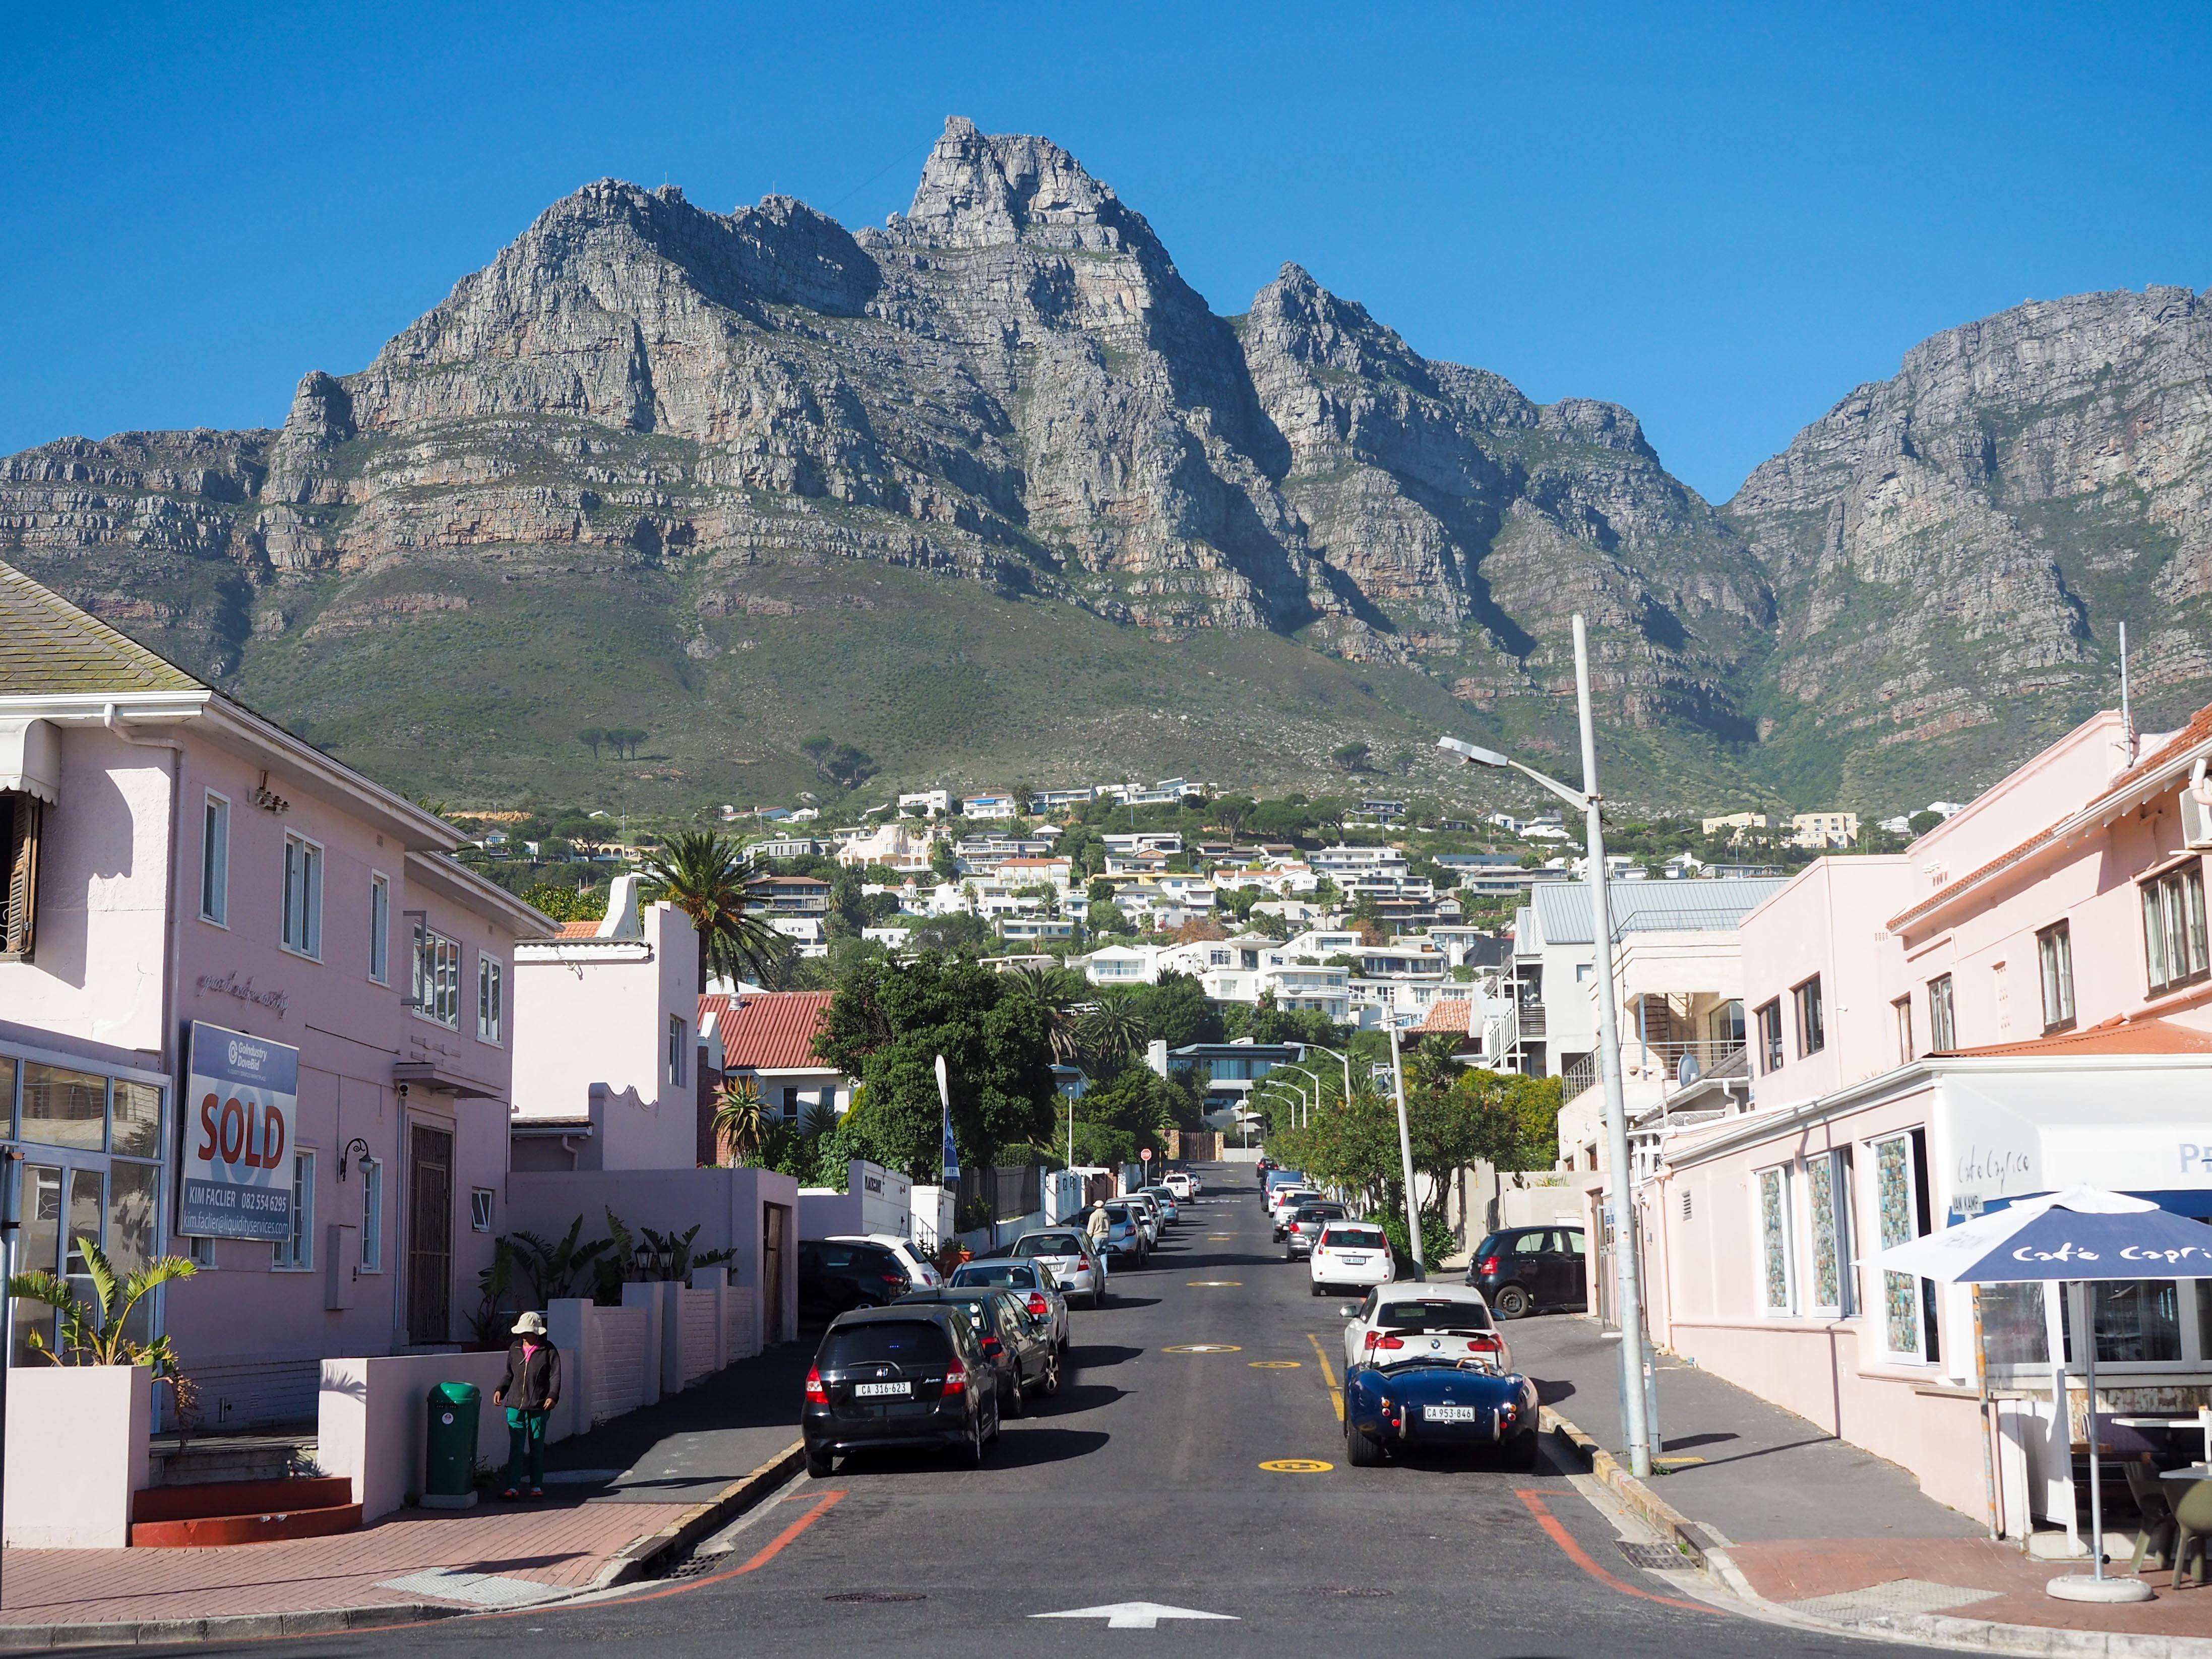 Camps Bay in Cape Town, South Africa